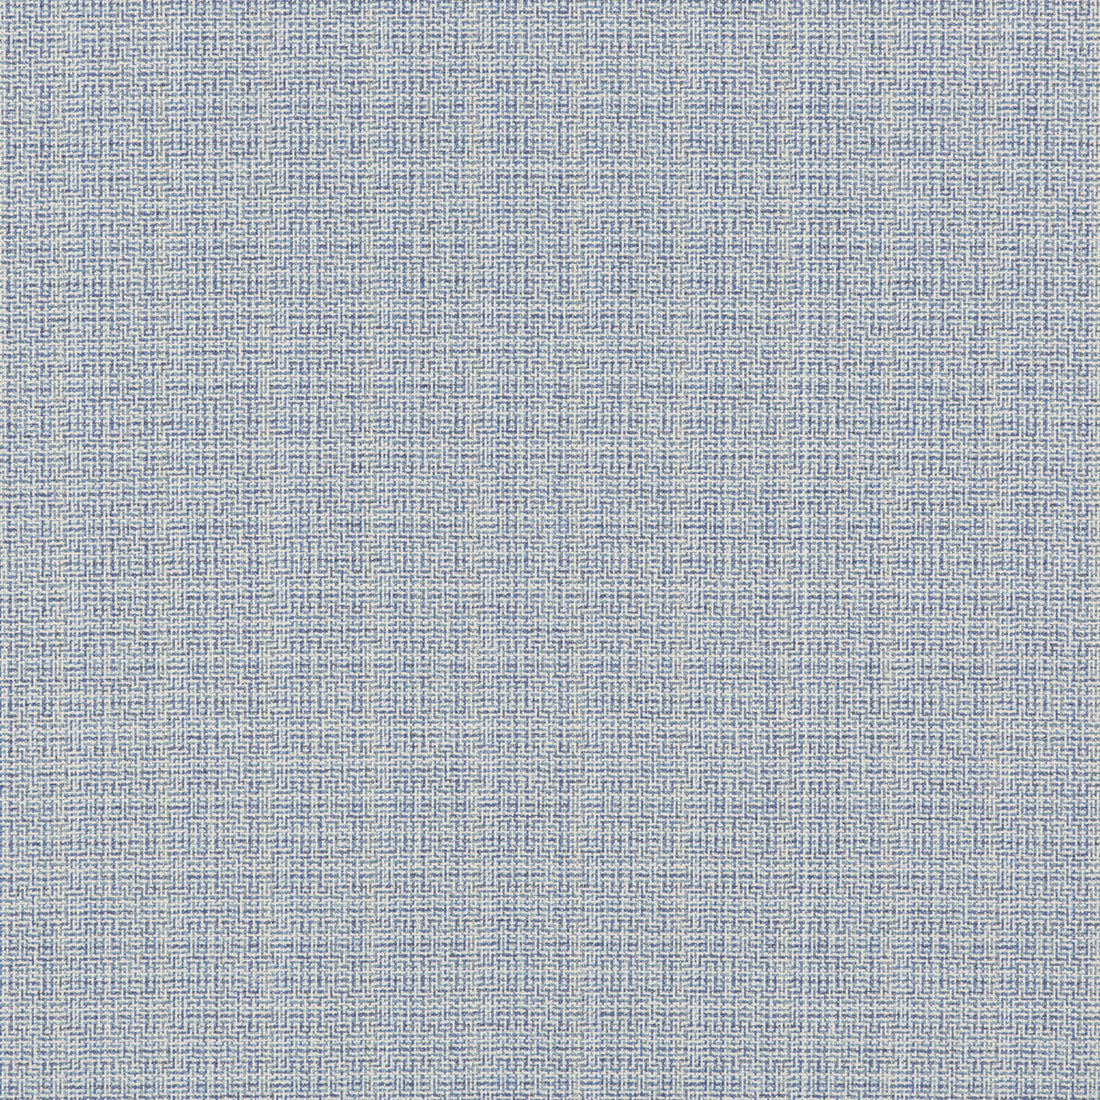 Gambier fabric in marine color - pattern 8015109.5.0 - by Brunschwig &amp; Fils in the Les Tropiques collection